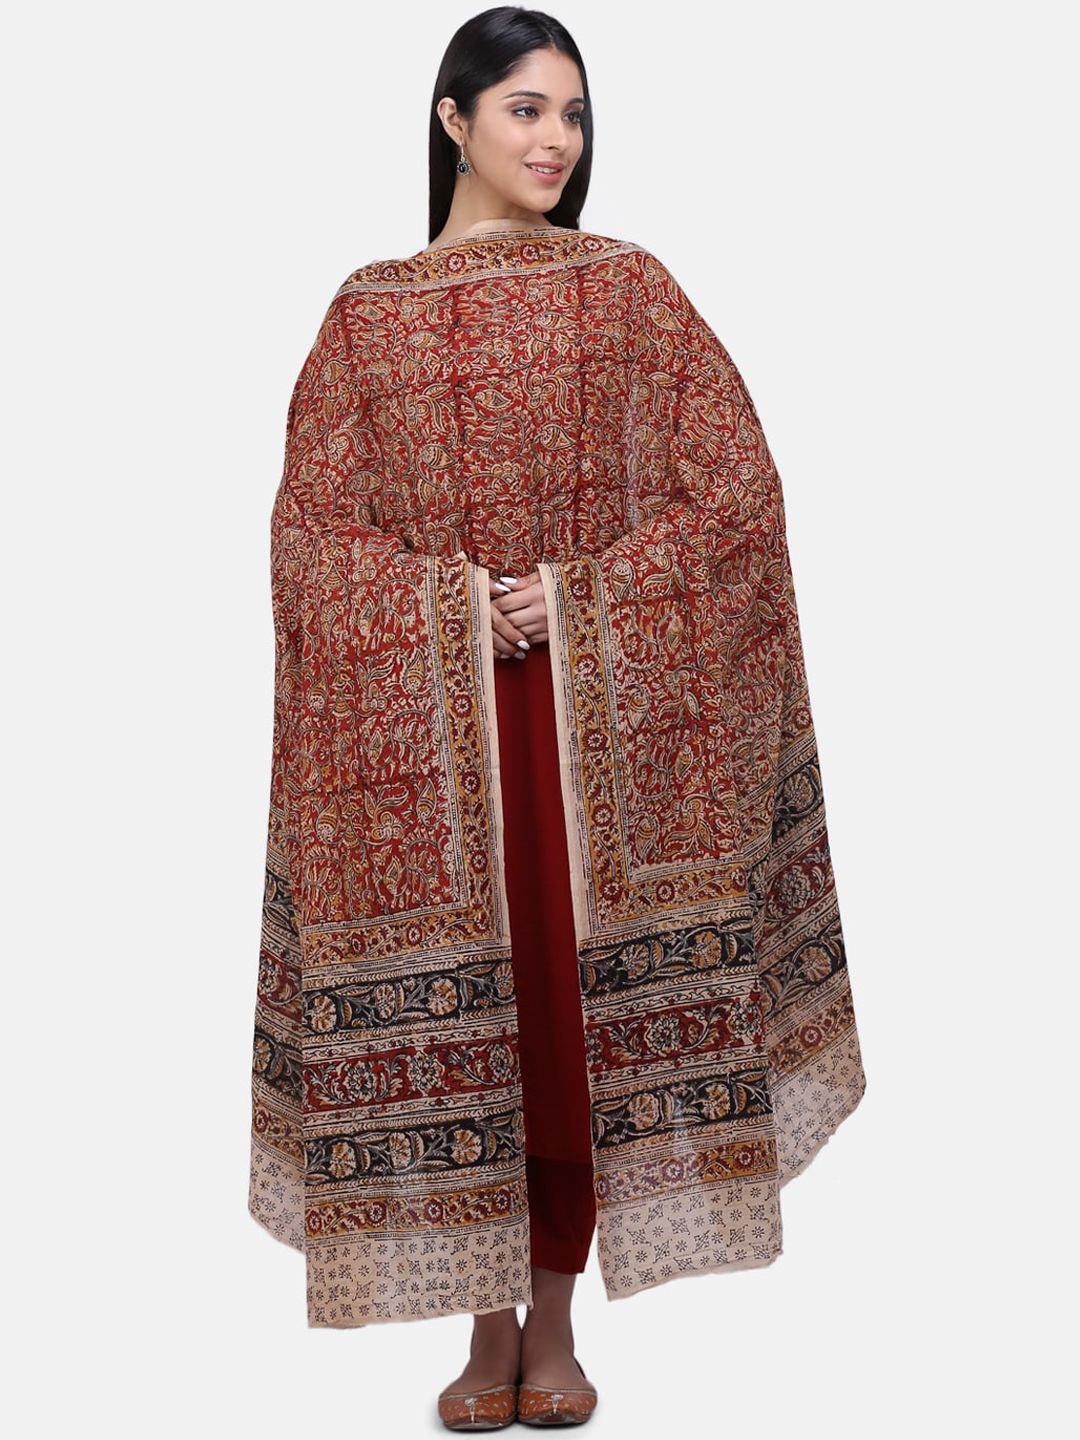 THE WEAVE TRAVELLER Brown & Beige Printed Sustainable Dupatta Price in India